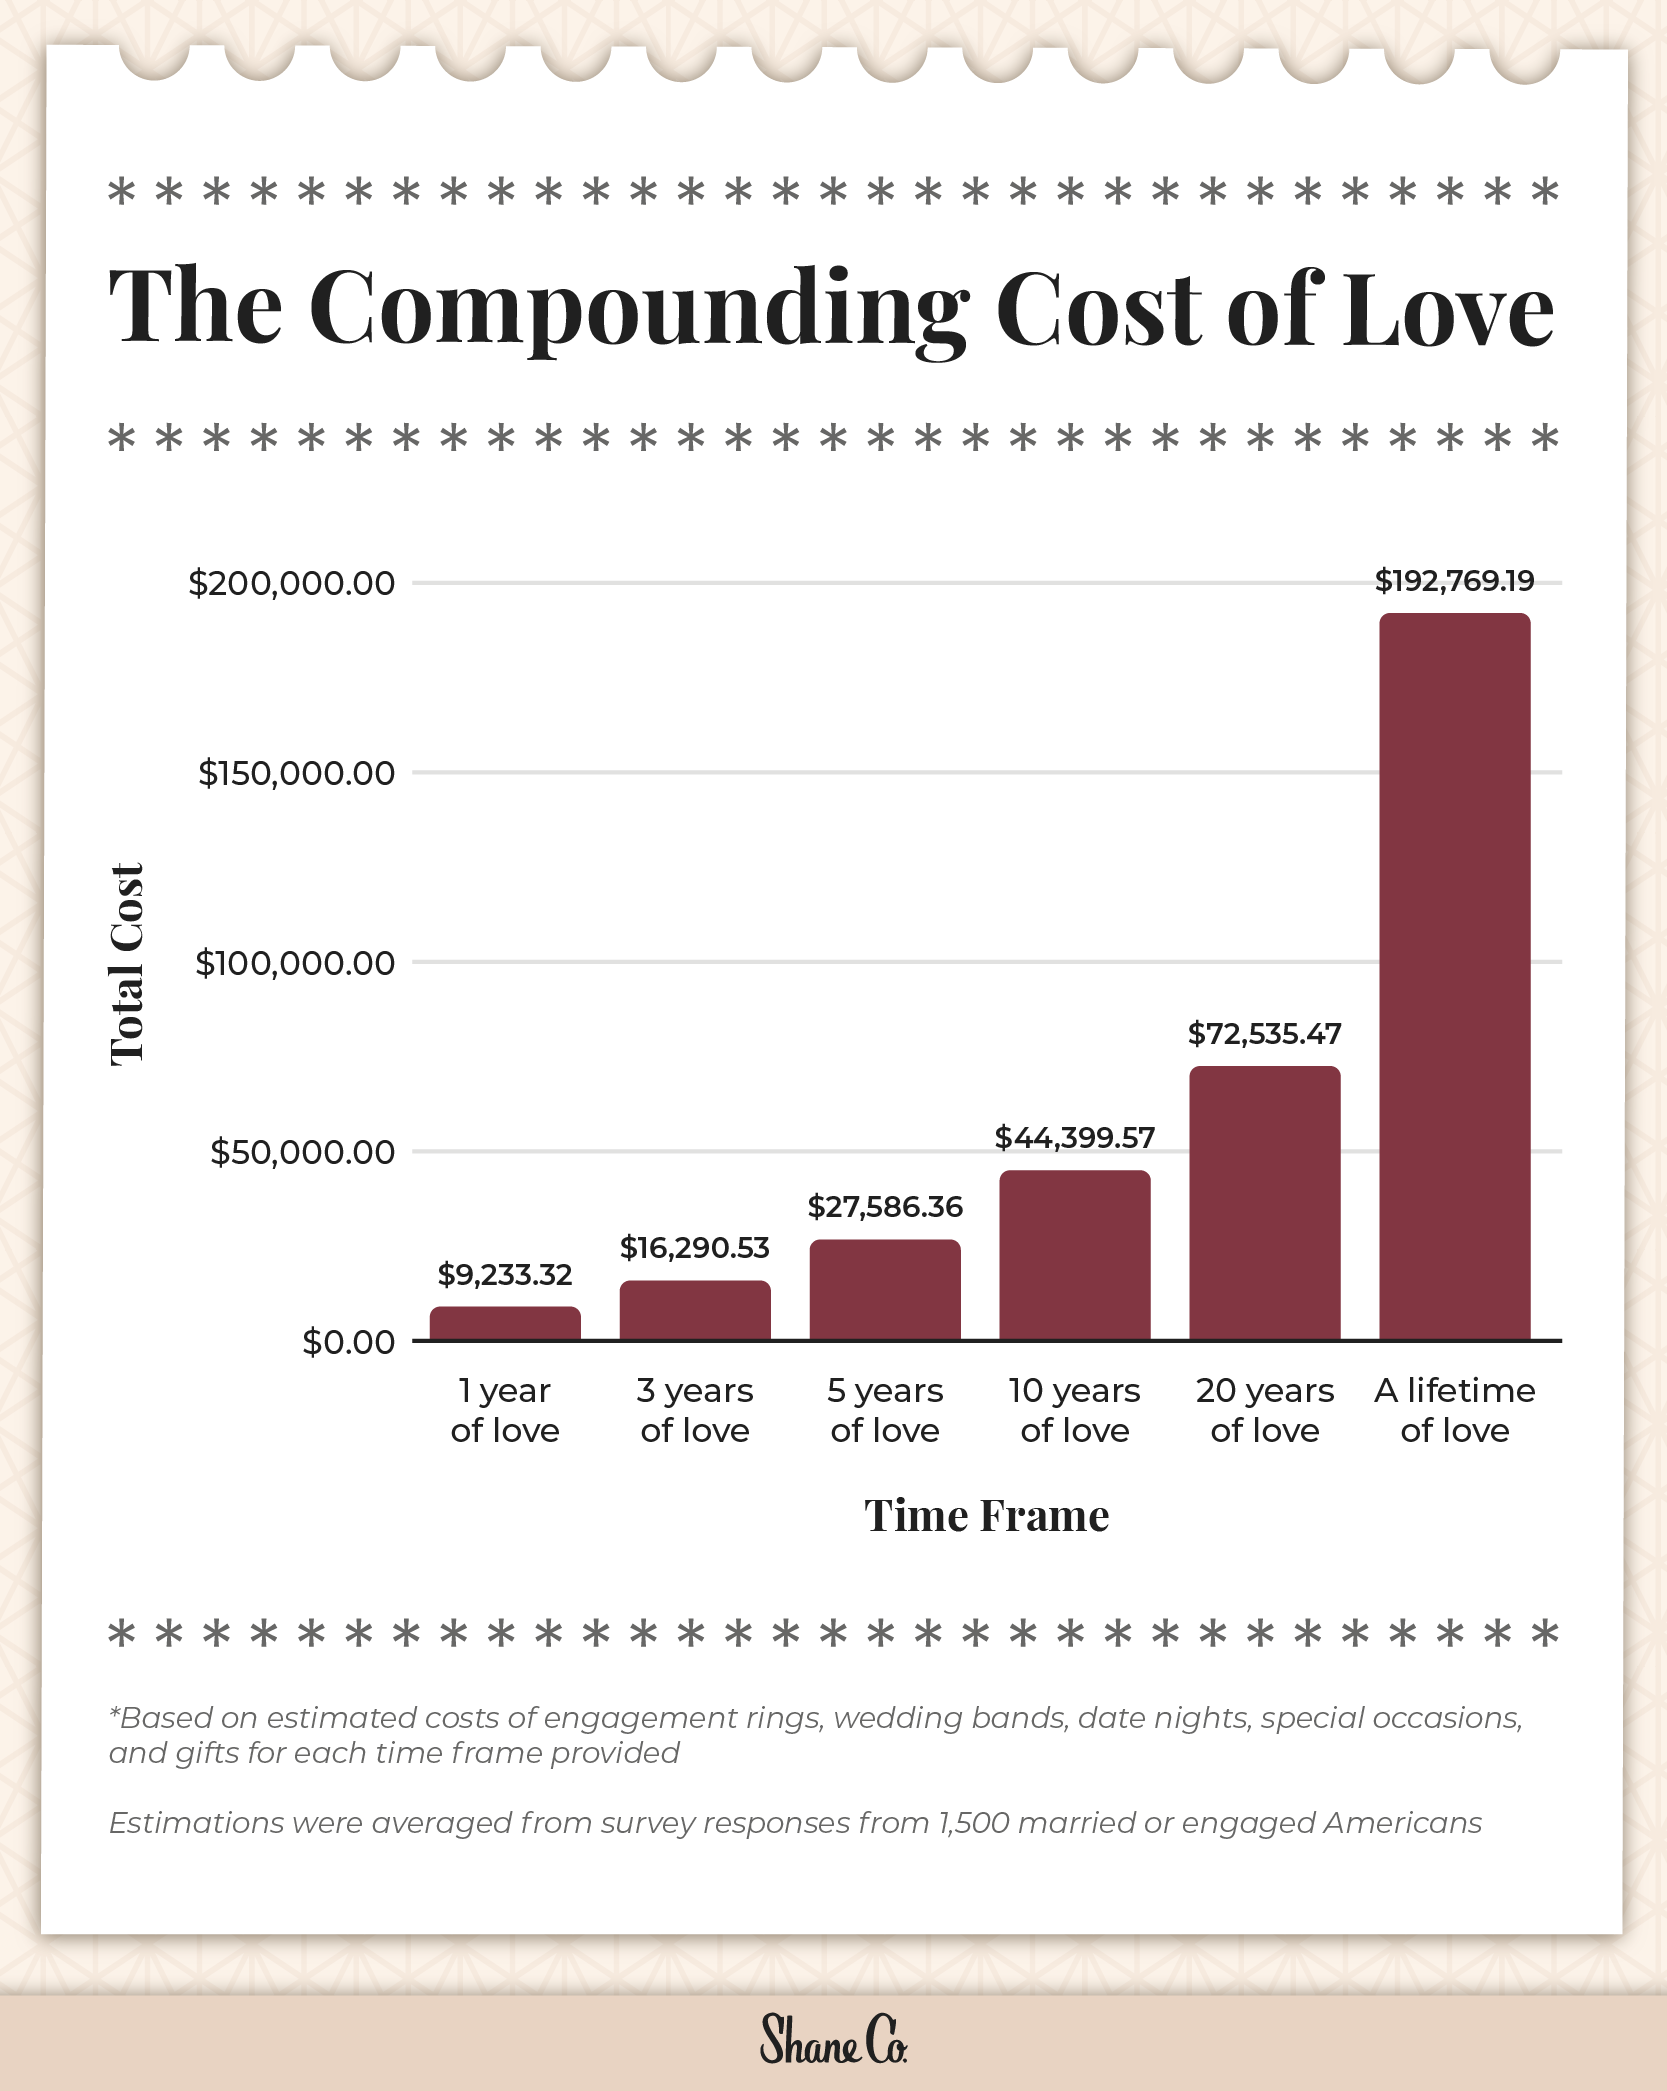 A bar chart showing how much money people spend in relationships over the course of a lifetime